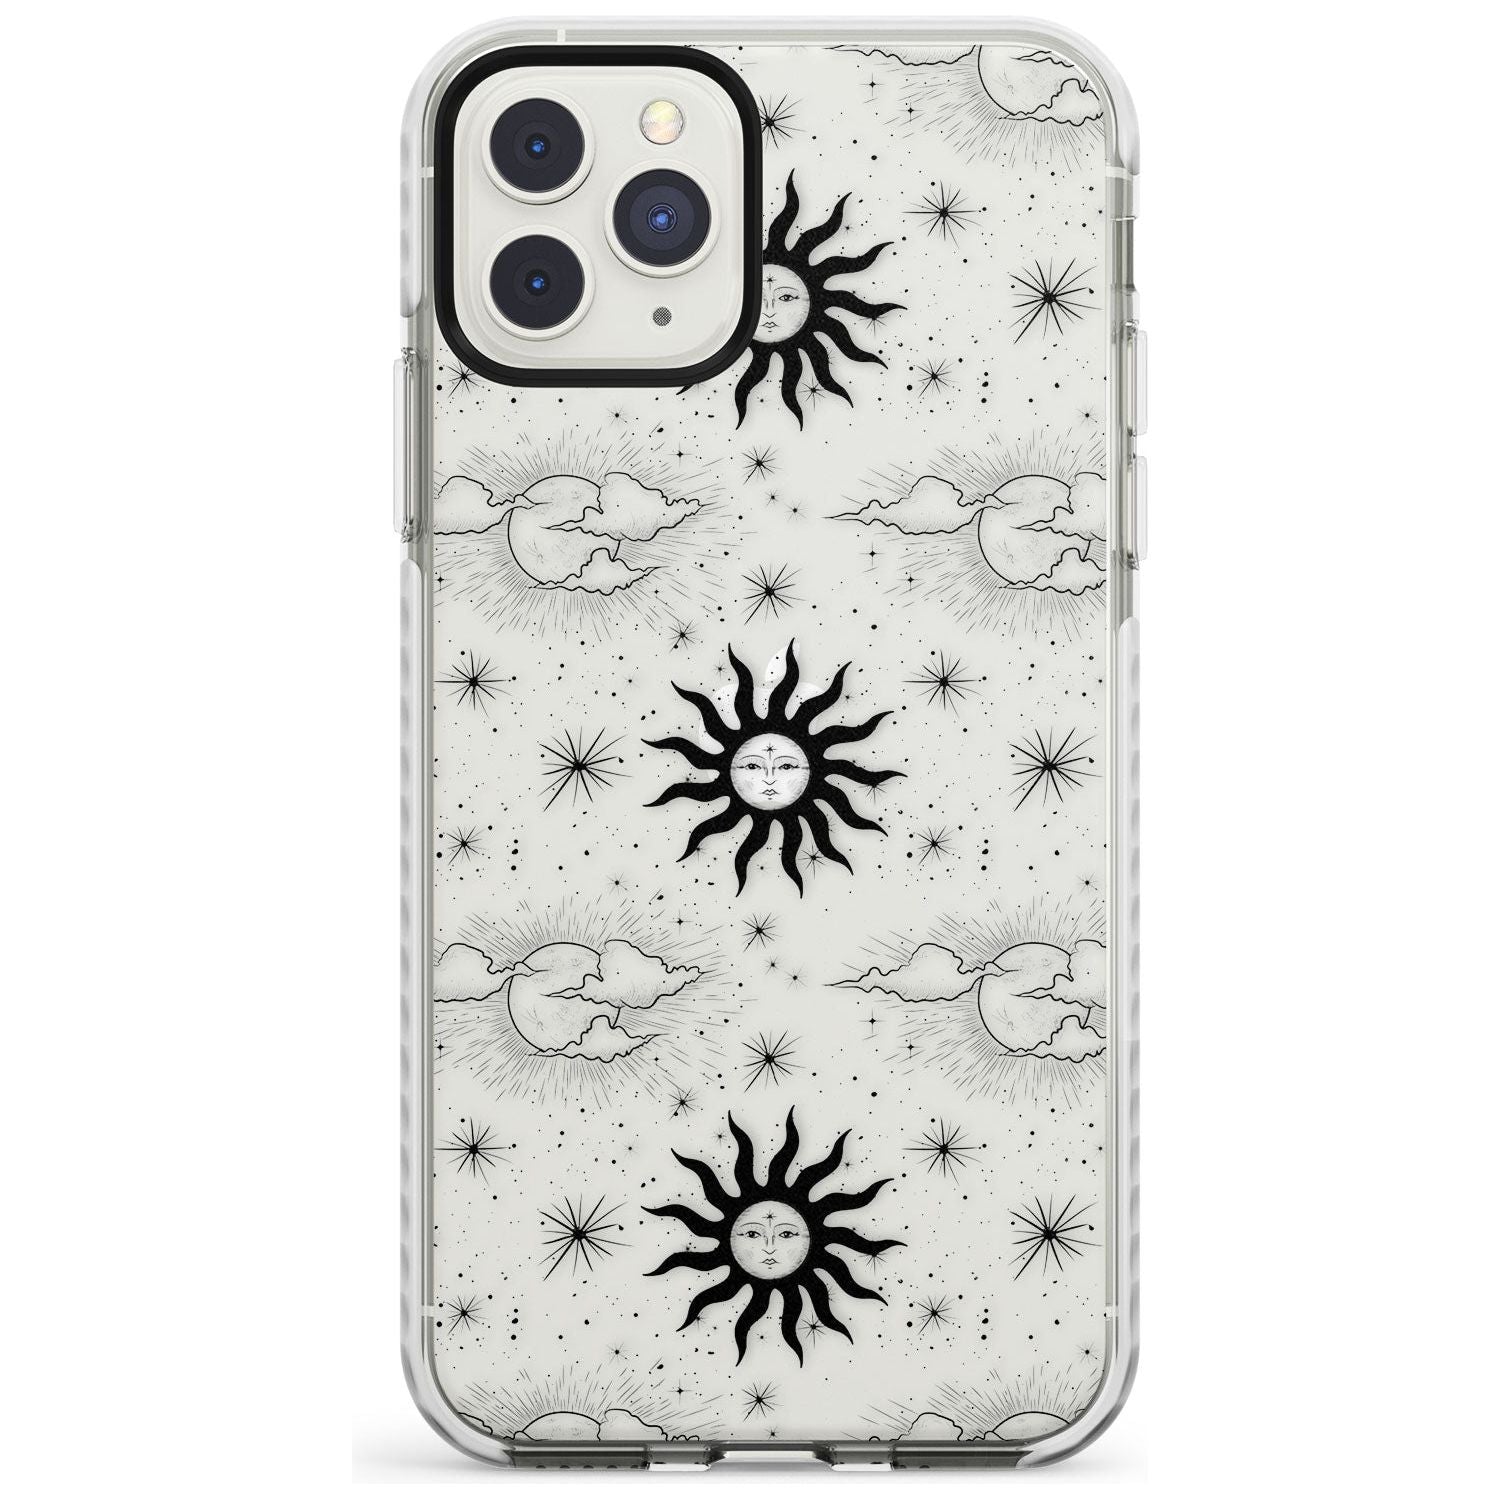 Suns & Clouds Vintage Astrological Impact Phone Case for iPhone 11 Pro Max